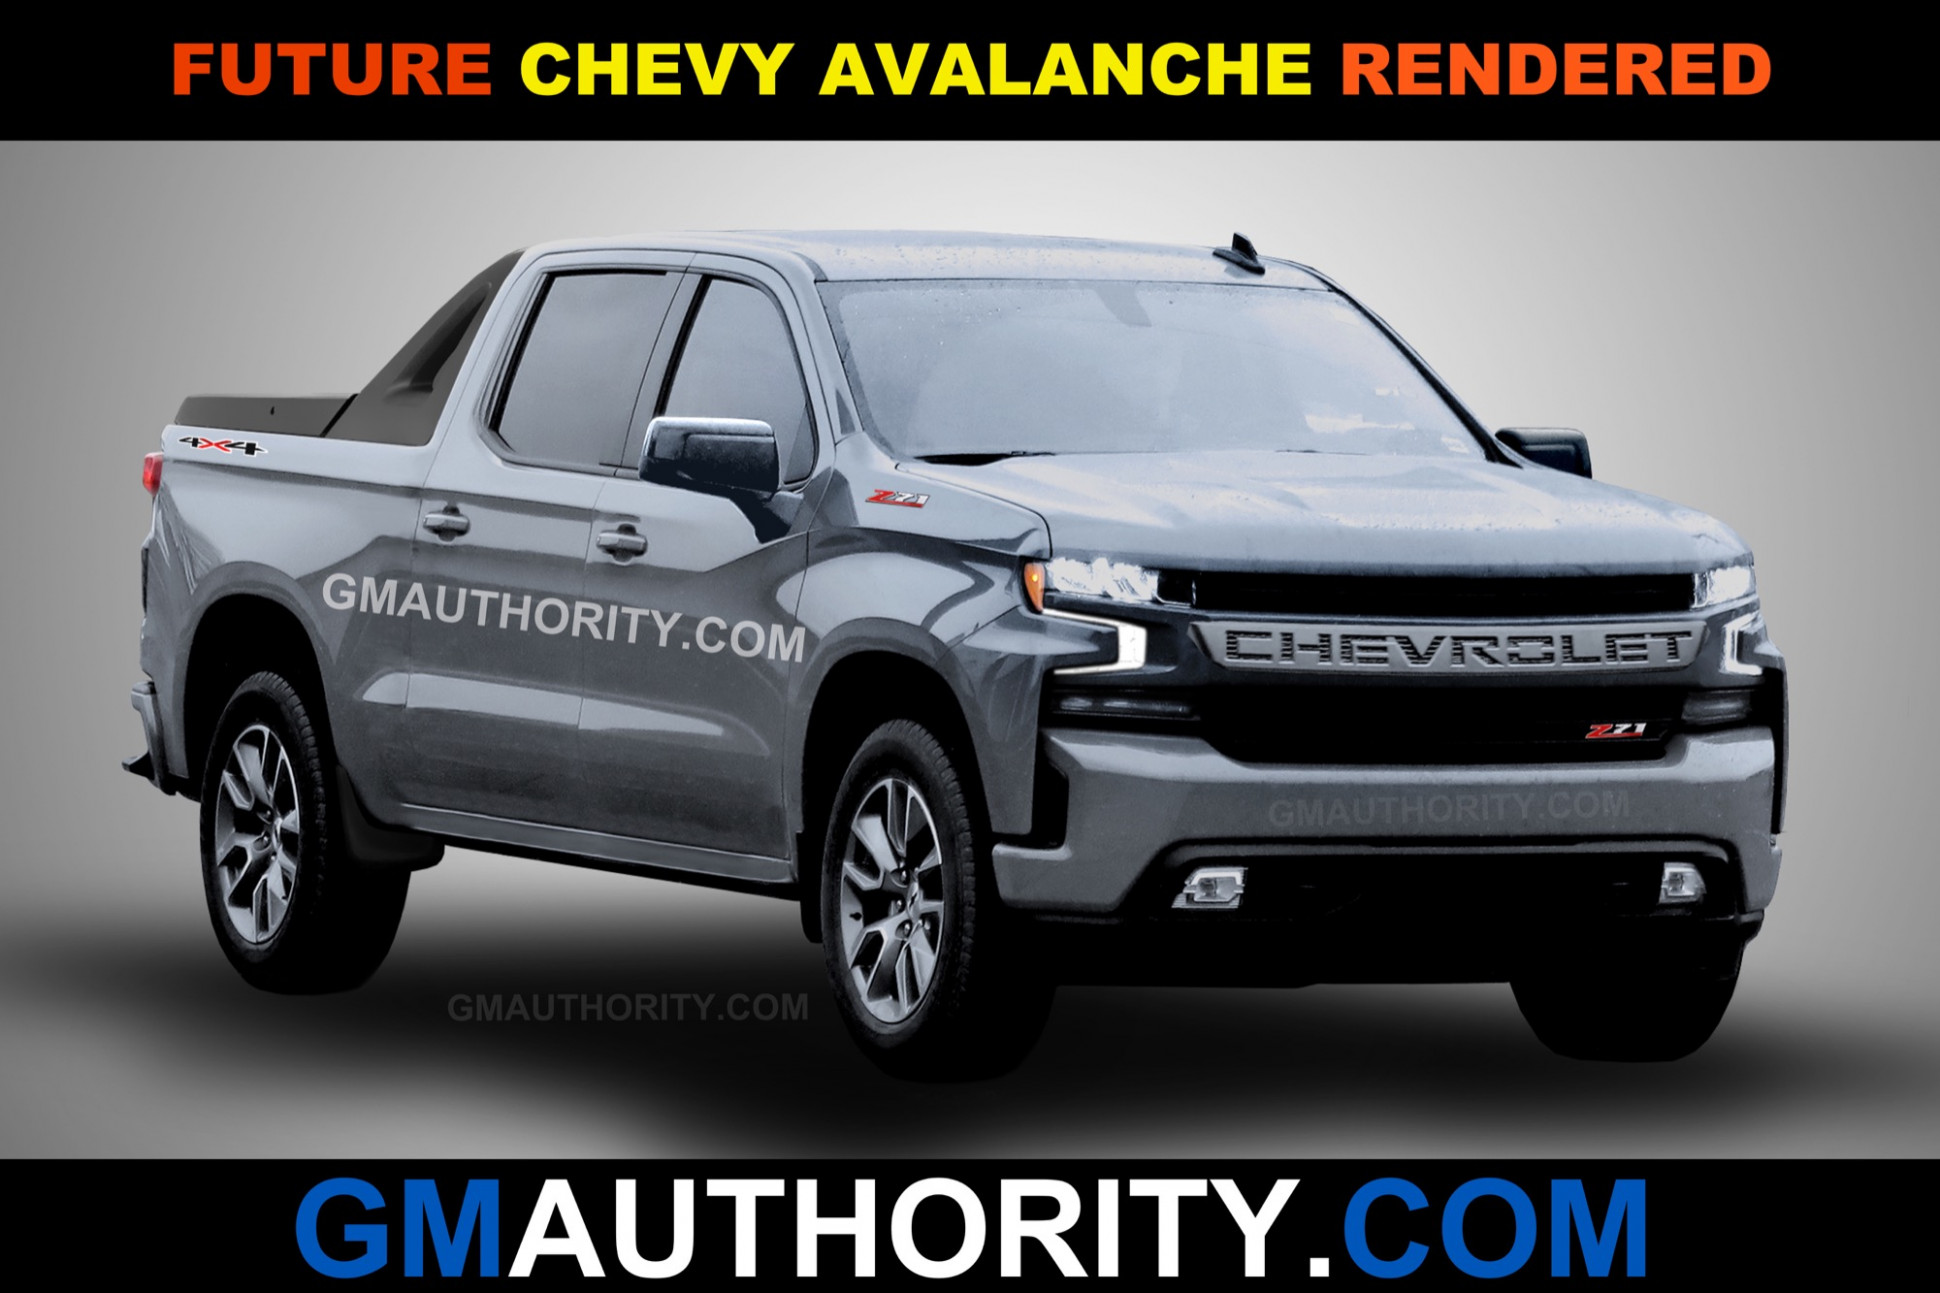 Exterior 2022 Chevy Avalanche